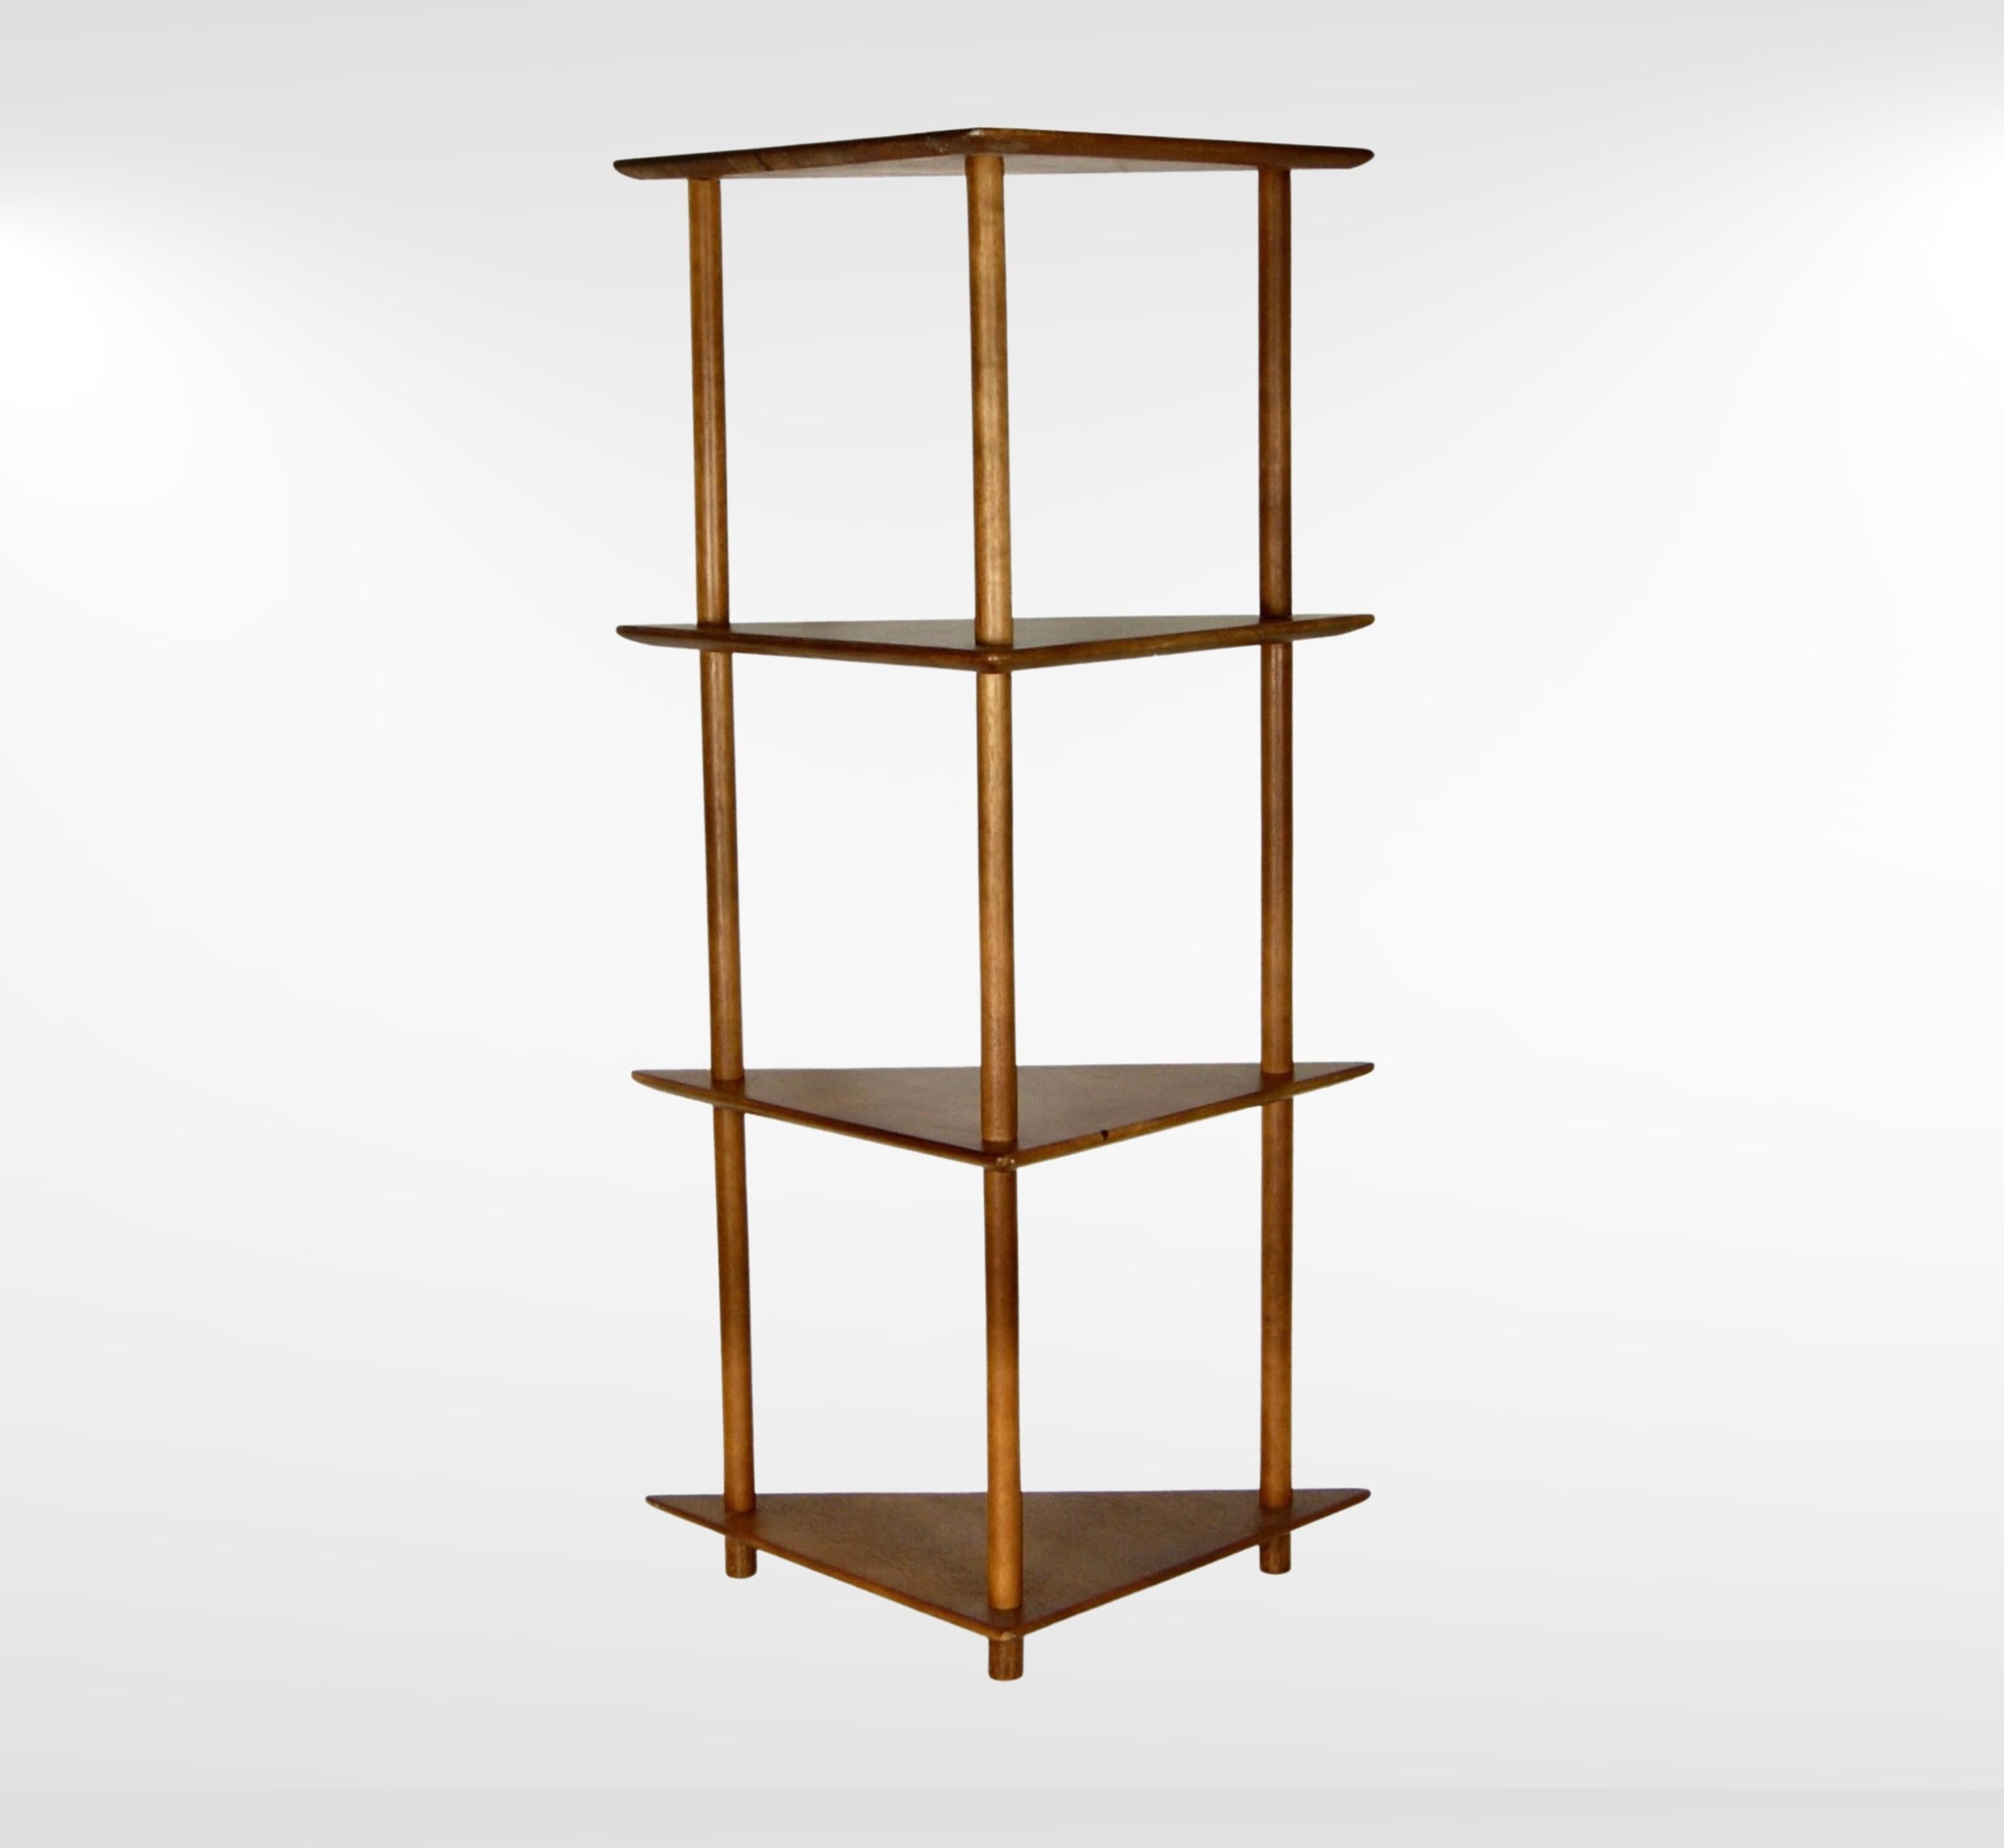 Unique mid-century Scandinavian teak angled corner bookshelf.
Streamline minimalist design furniture.
Designed to fit into angled corners and reading nooks.
Made of solid teak shelves and legs.
The shelves have delicately rounded yet angled and